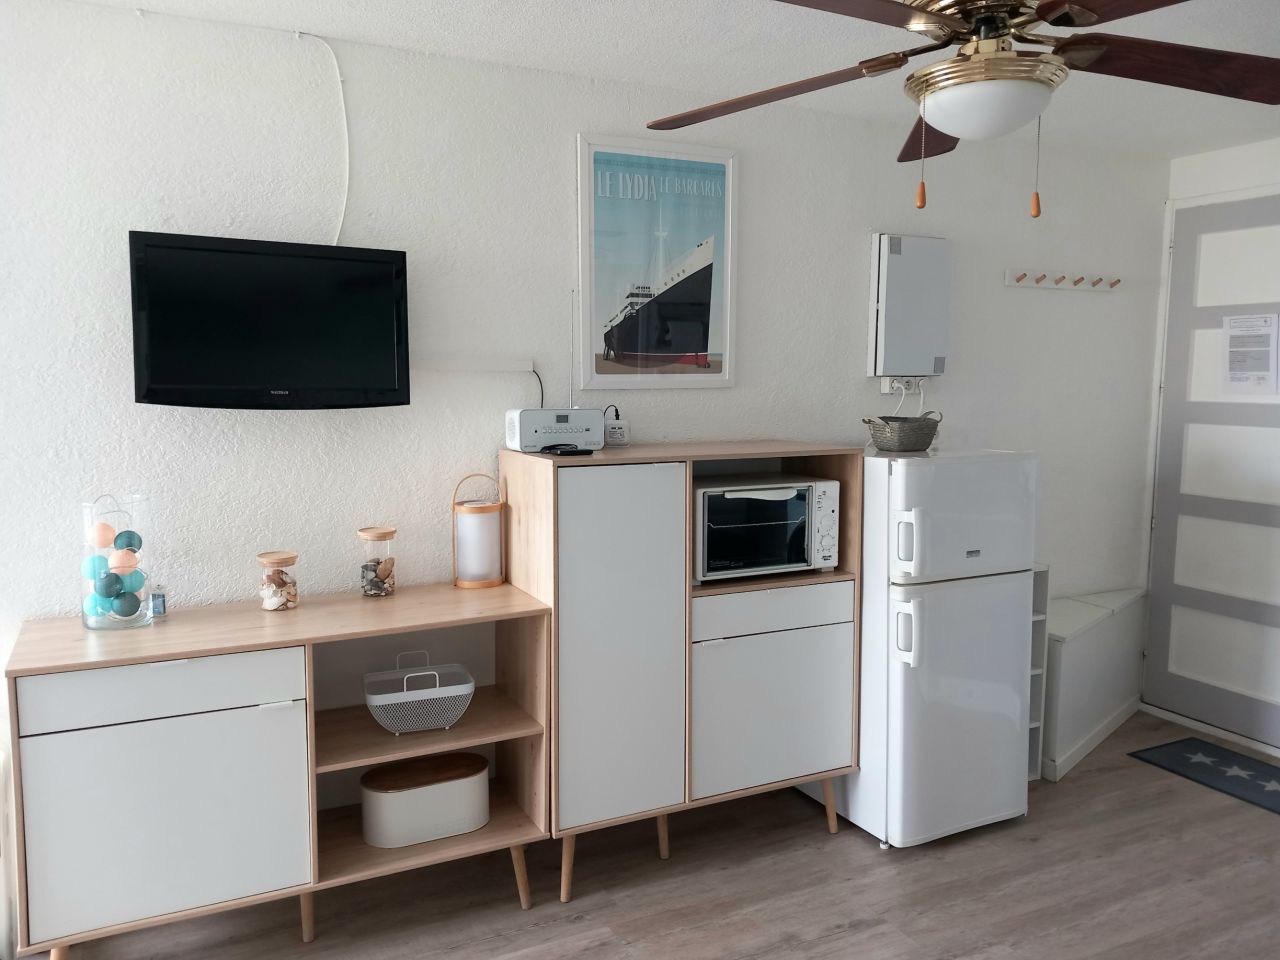 Location appartement Le Baracrs N°6765 image 3